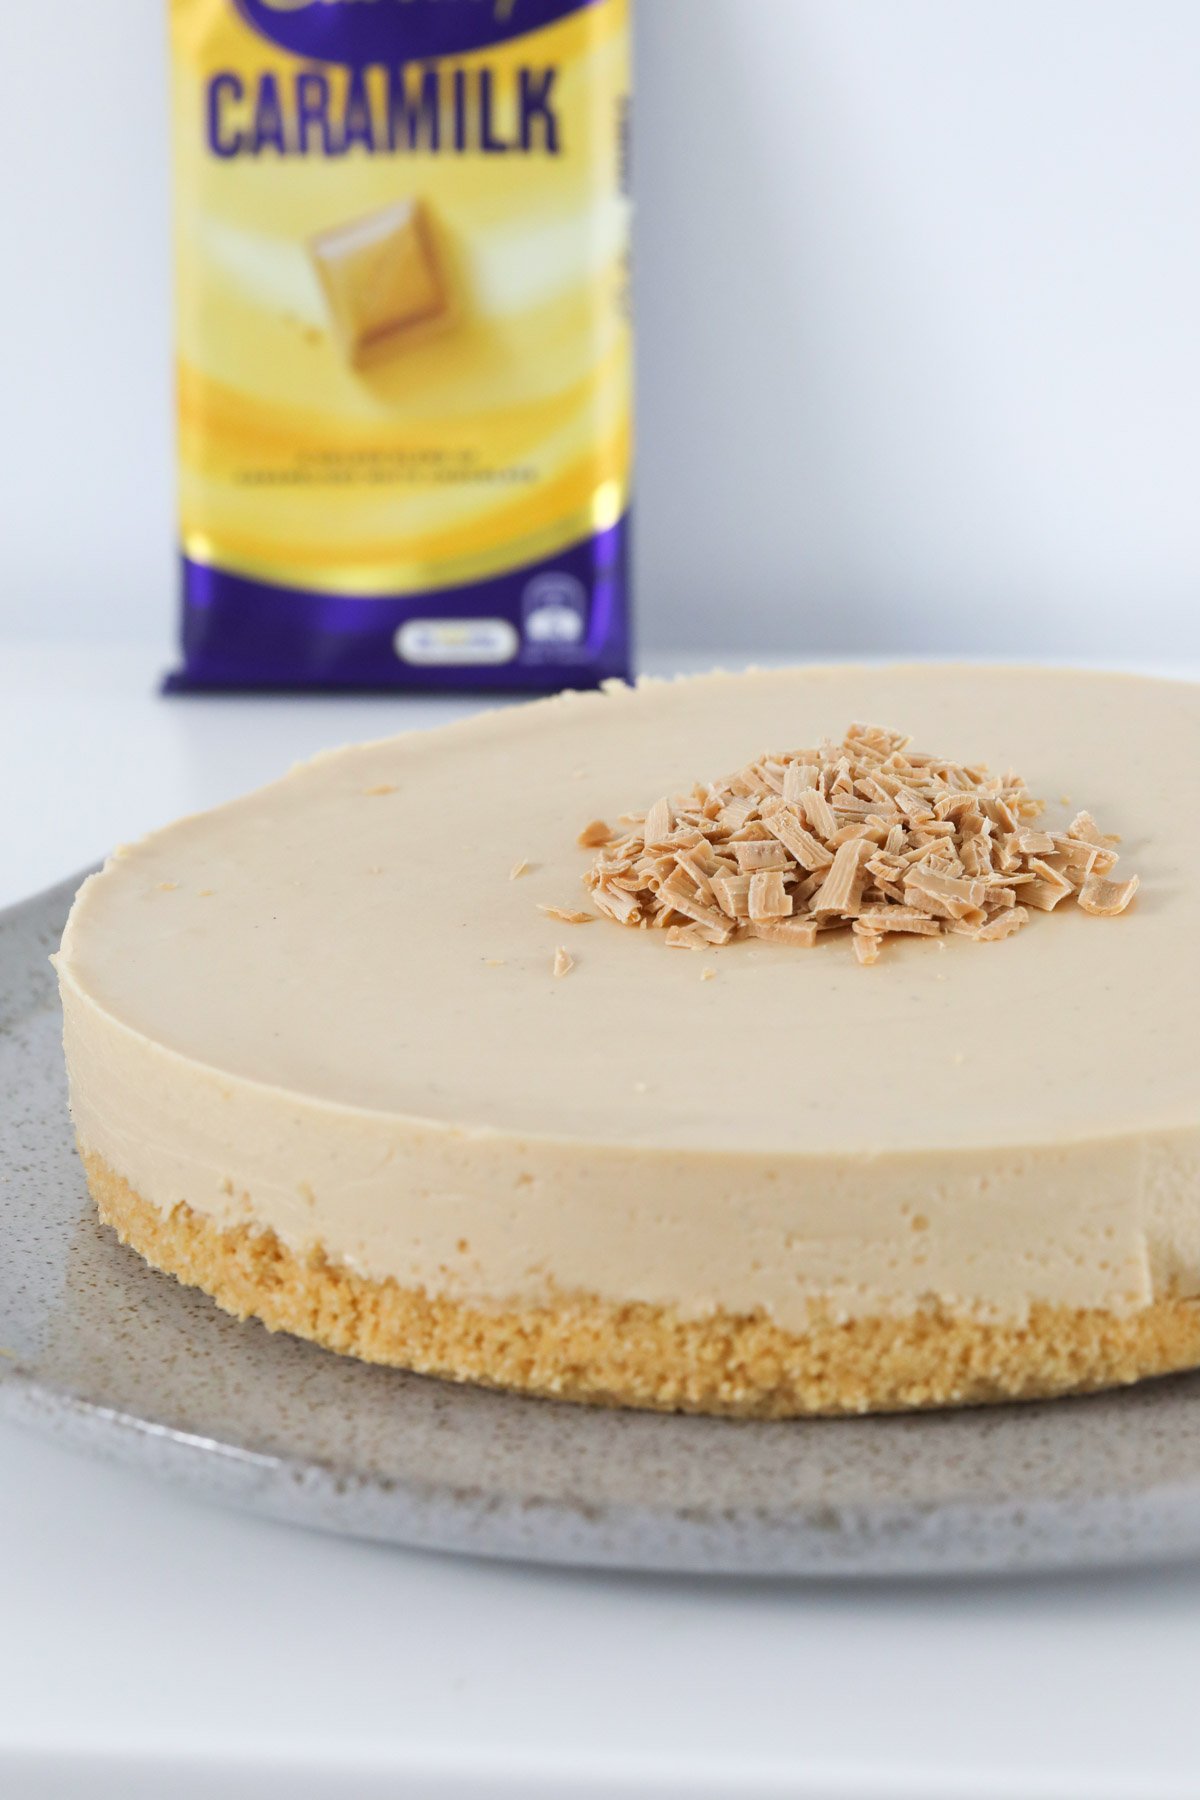 A Caramilk cheesecake with a block of chocolate in the background.